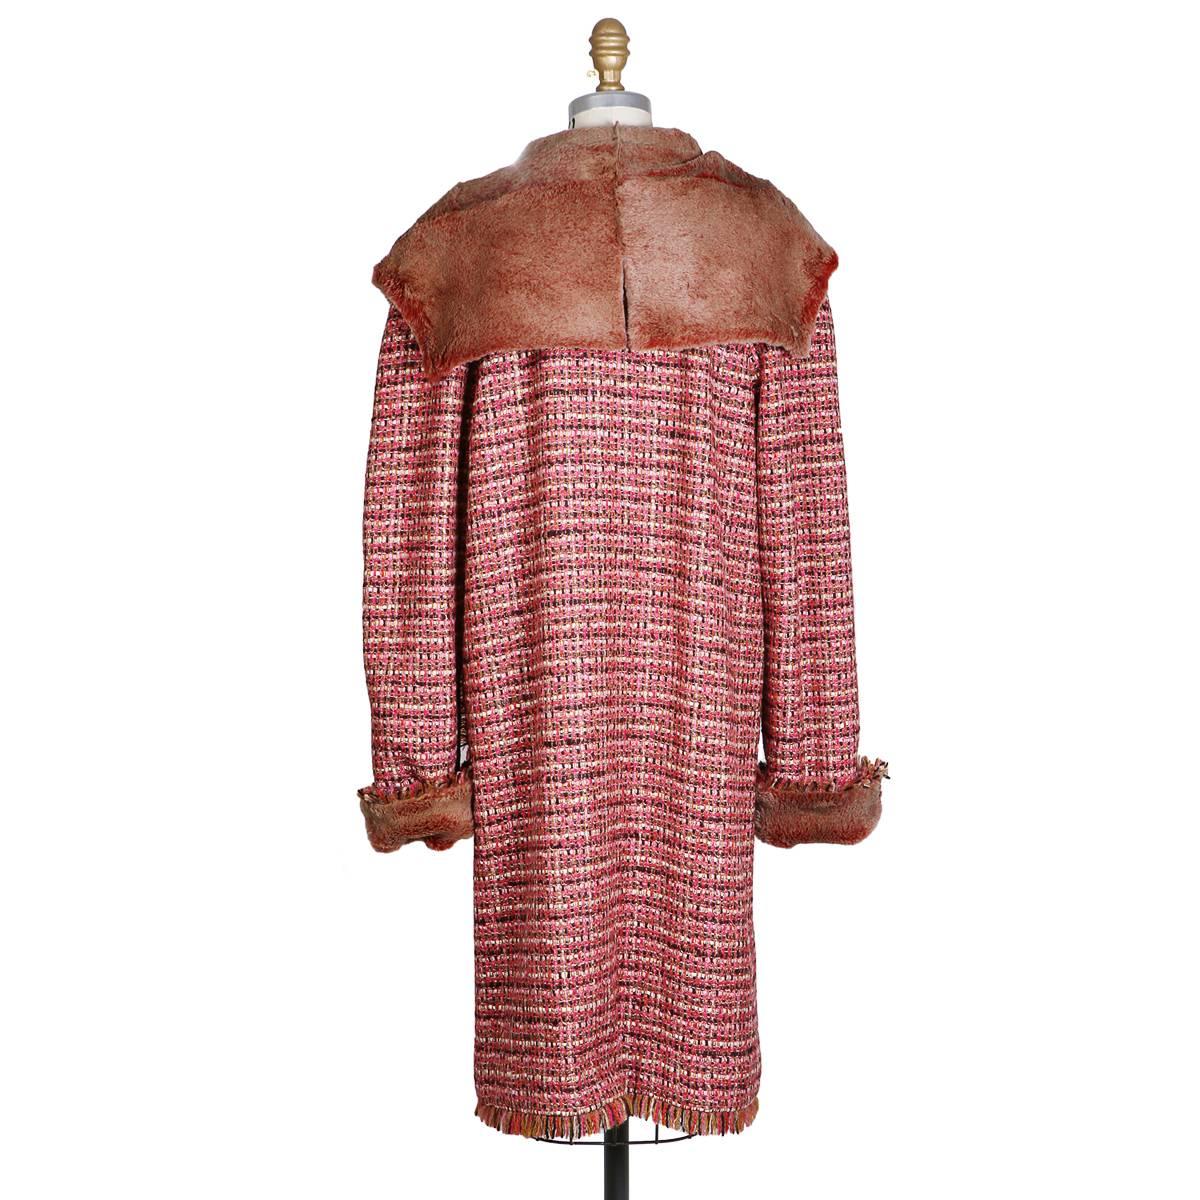 Coat by Chanel from Fall 2001
Pink tweed with rabbit fir trim, collar, and lining
Frayed hem
Condition: Excellent
Size/Measurements:
Size 40
40